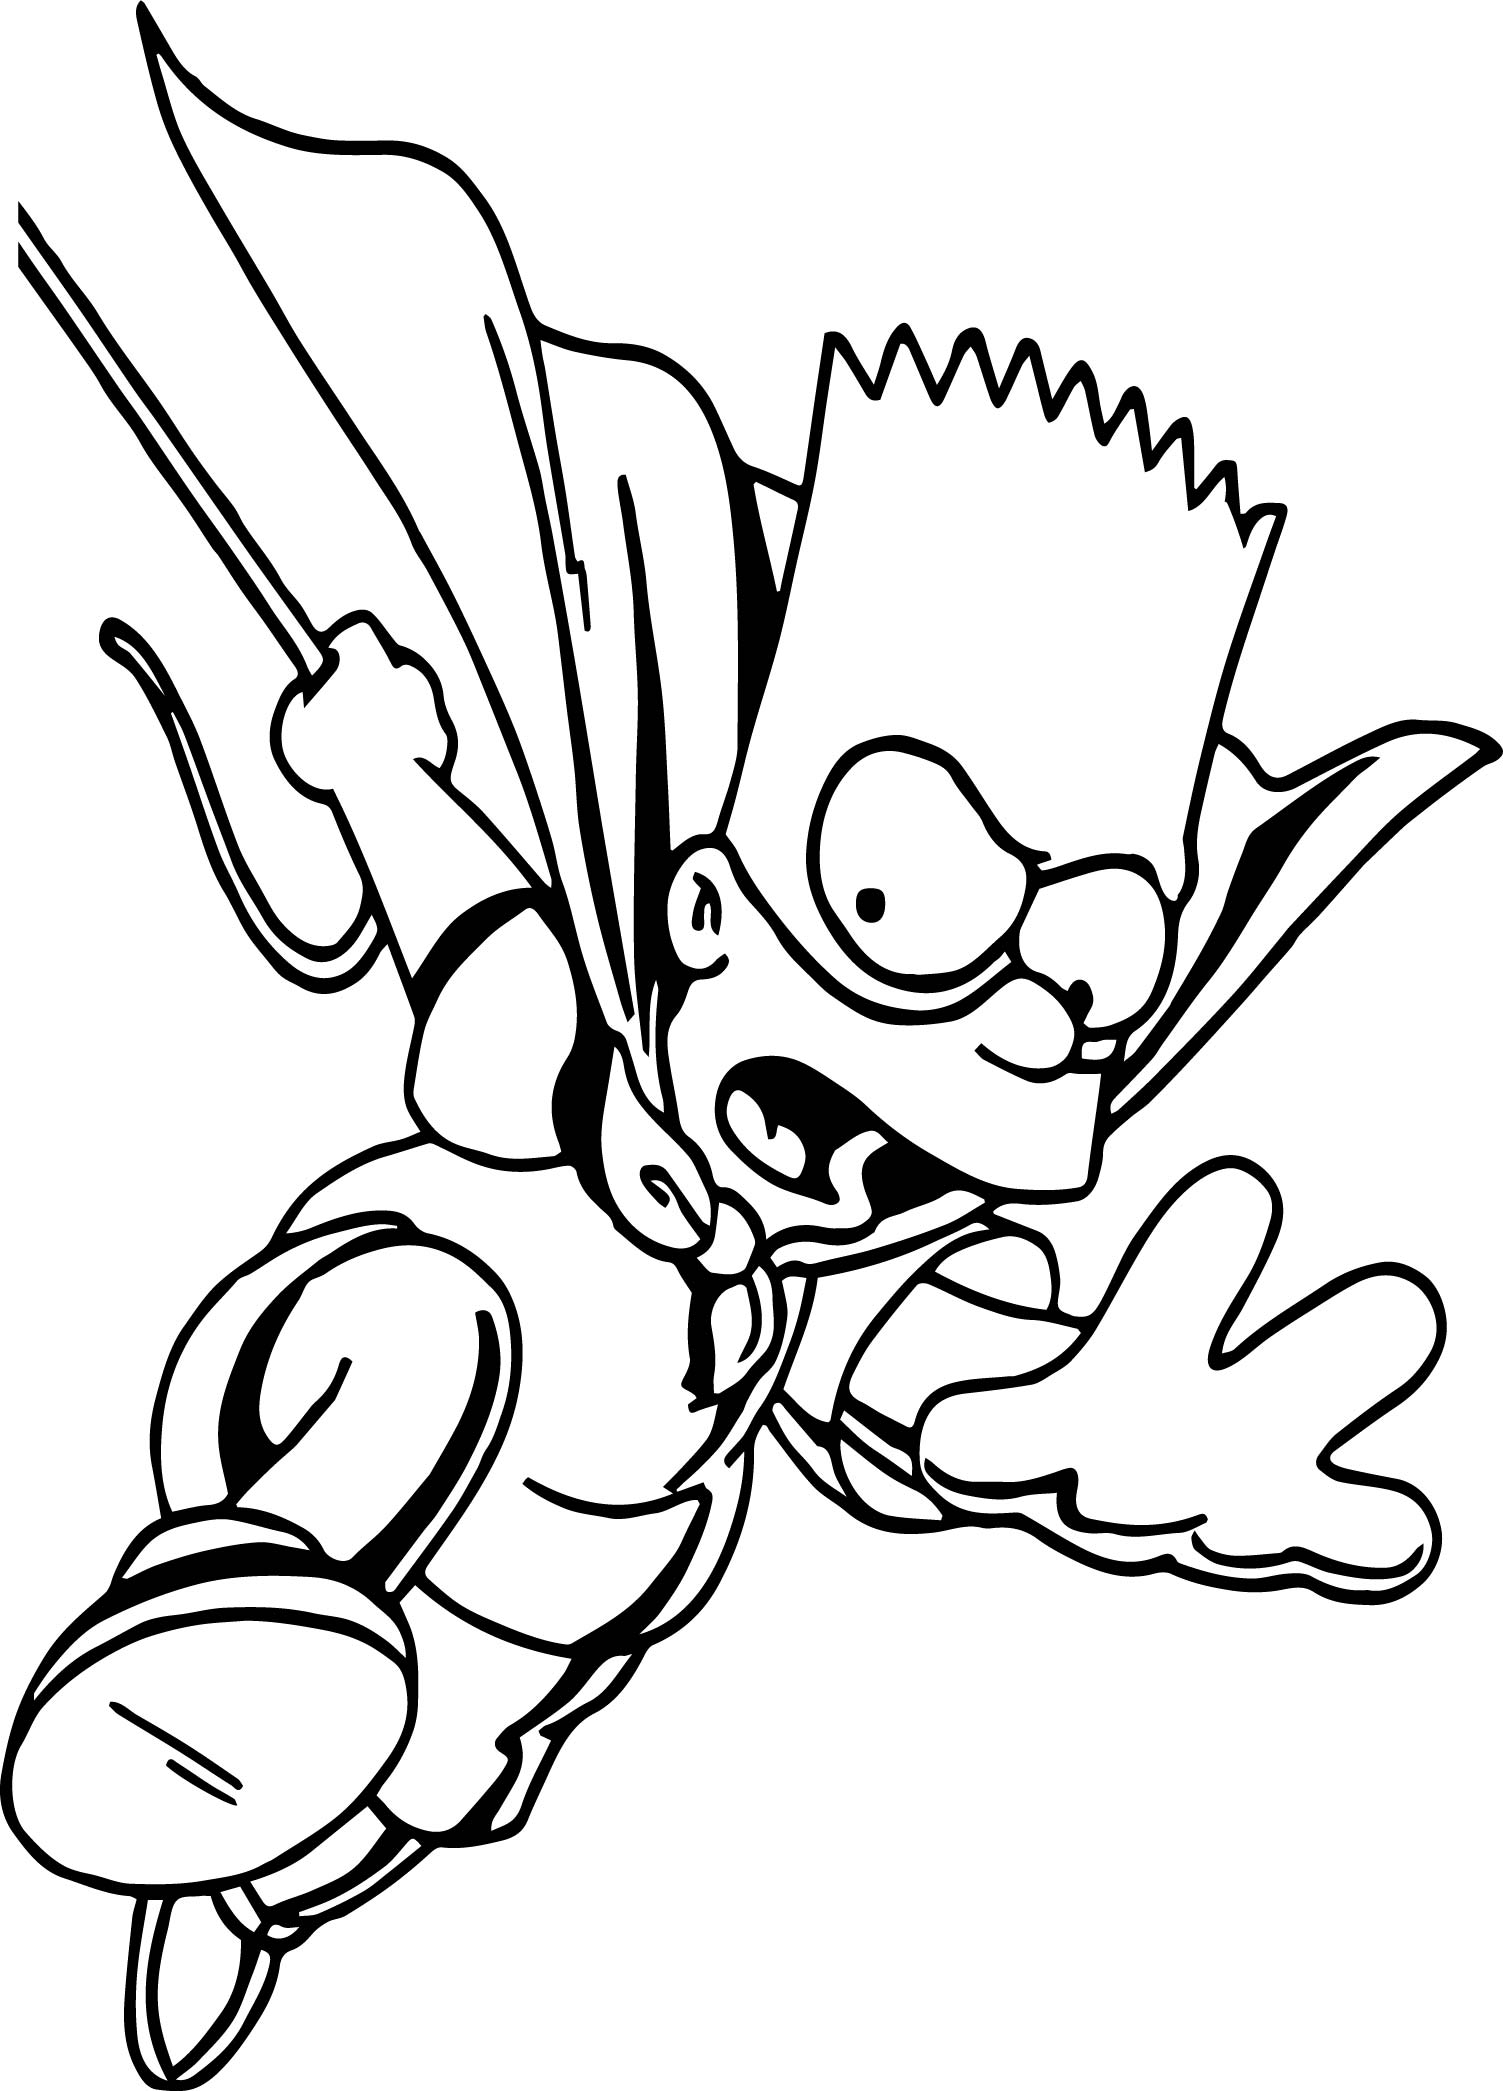 Superman Spiderman Bart The Simpsons Coloring Page